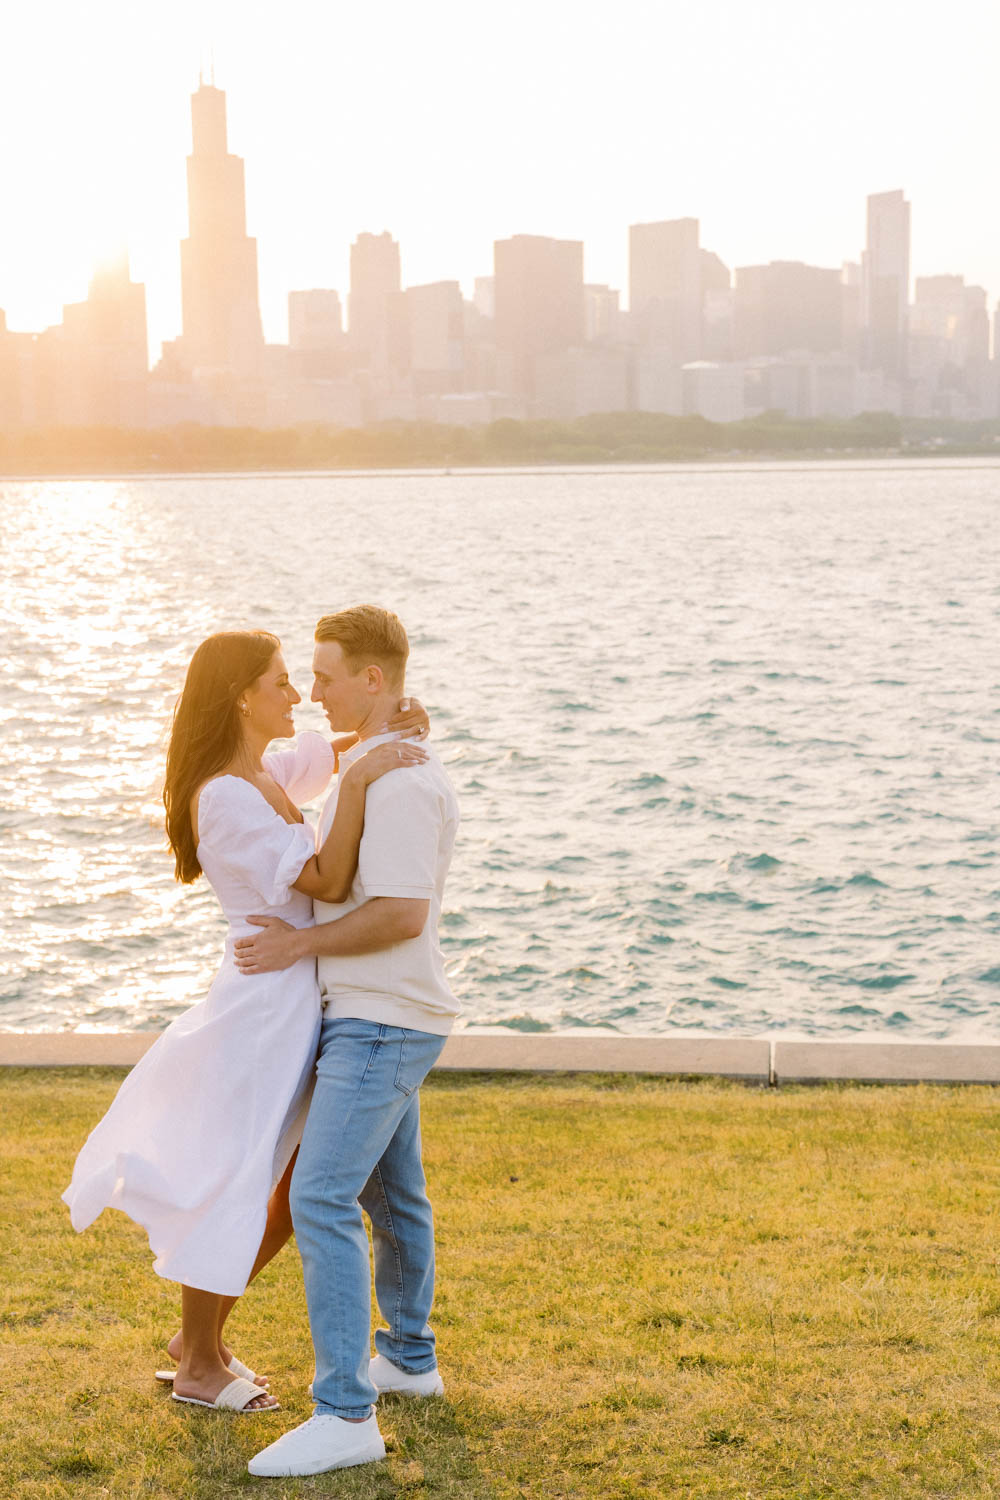 A sunset engagement photo taken along the lakefront with the Chicago skyline